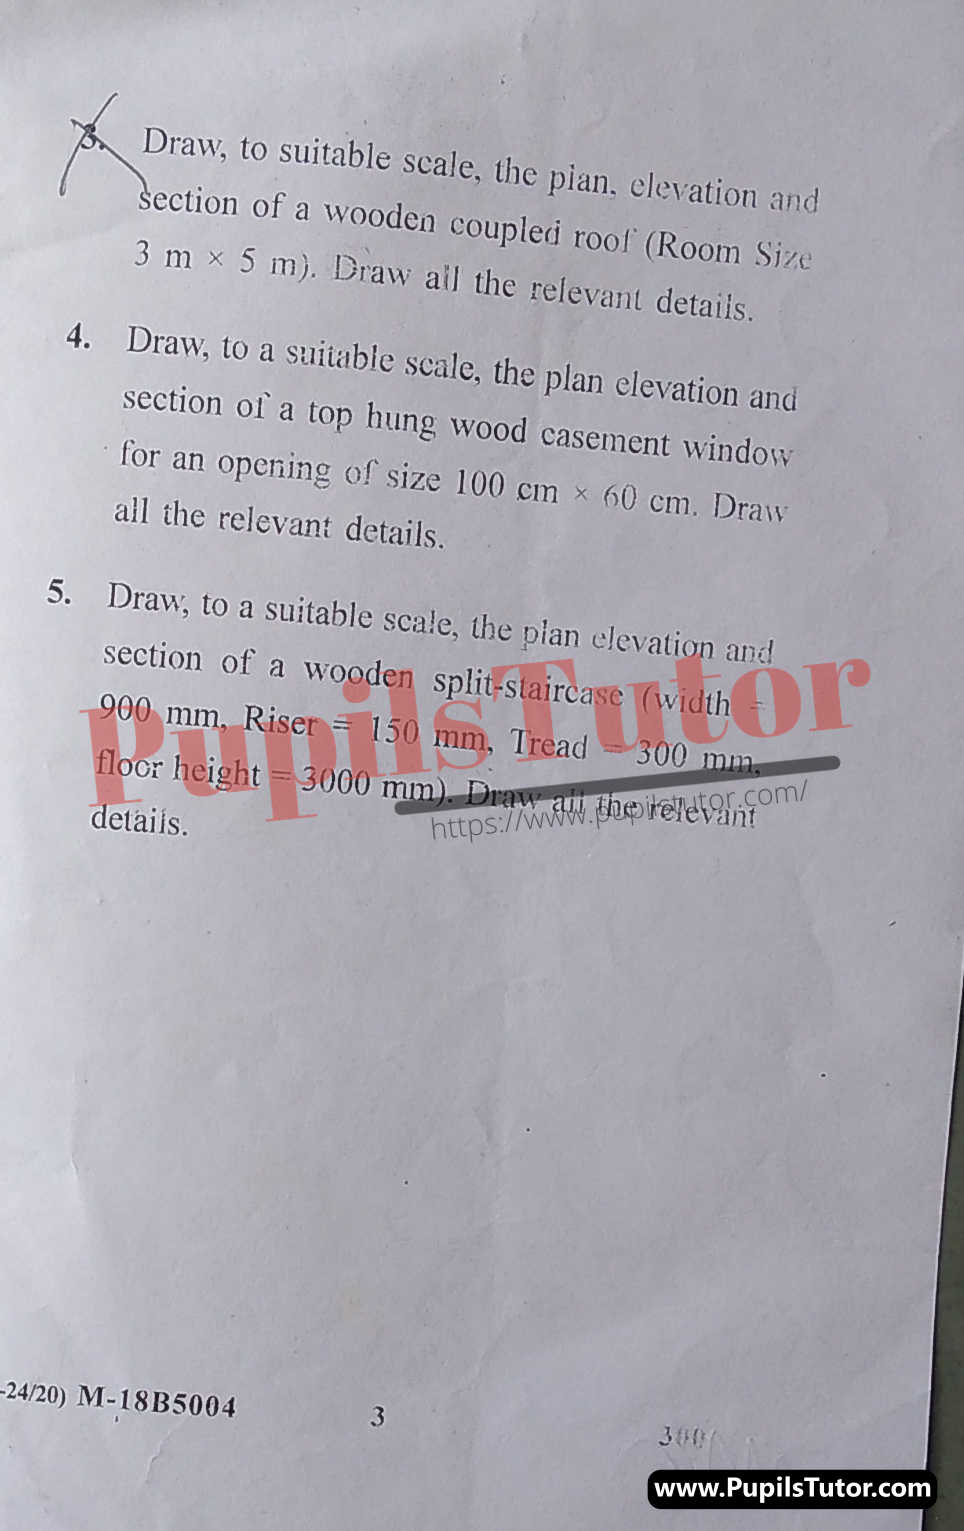 Free Download PDF Of Deenbandhu Chhotu Ram University of Science and Technology (DCRUST) BArch (B. Architecture) Second Semester Latest Question Paper For Building Construction Subject (Page 3) - https://www.pupilstutor.com